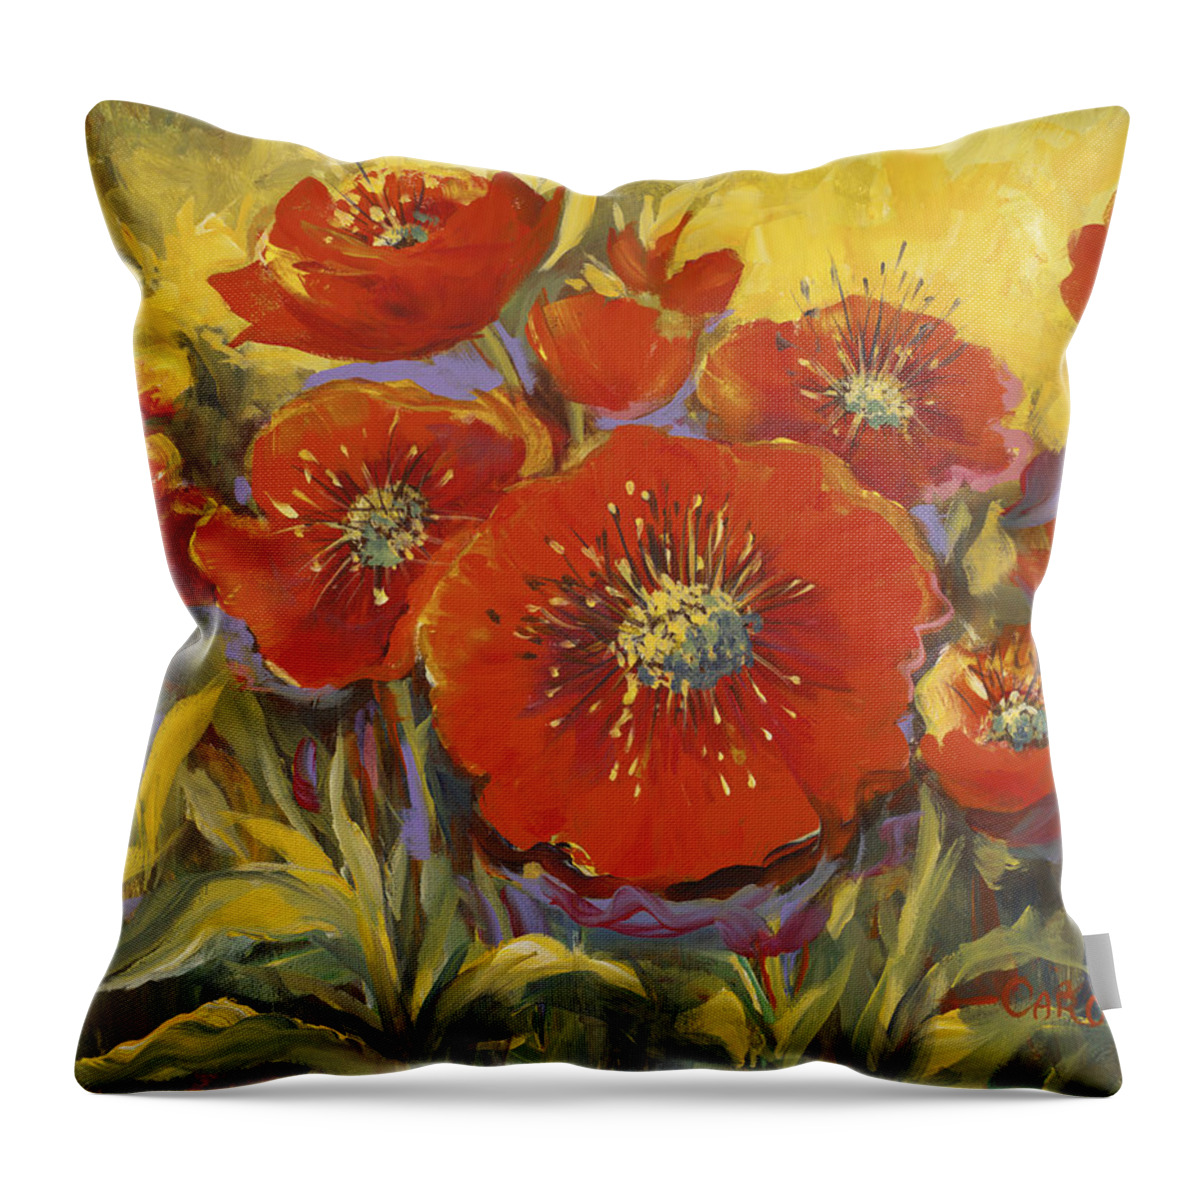 Plants Throw Pillow featuring the painting Fortuitous Poppies by Caroline Patrick